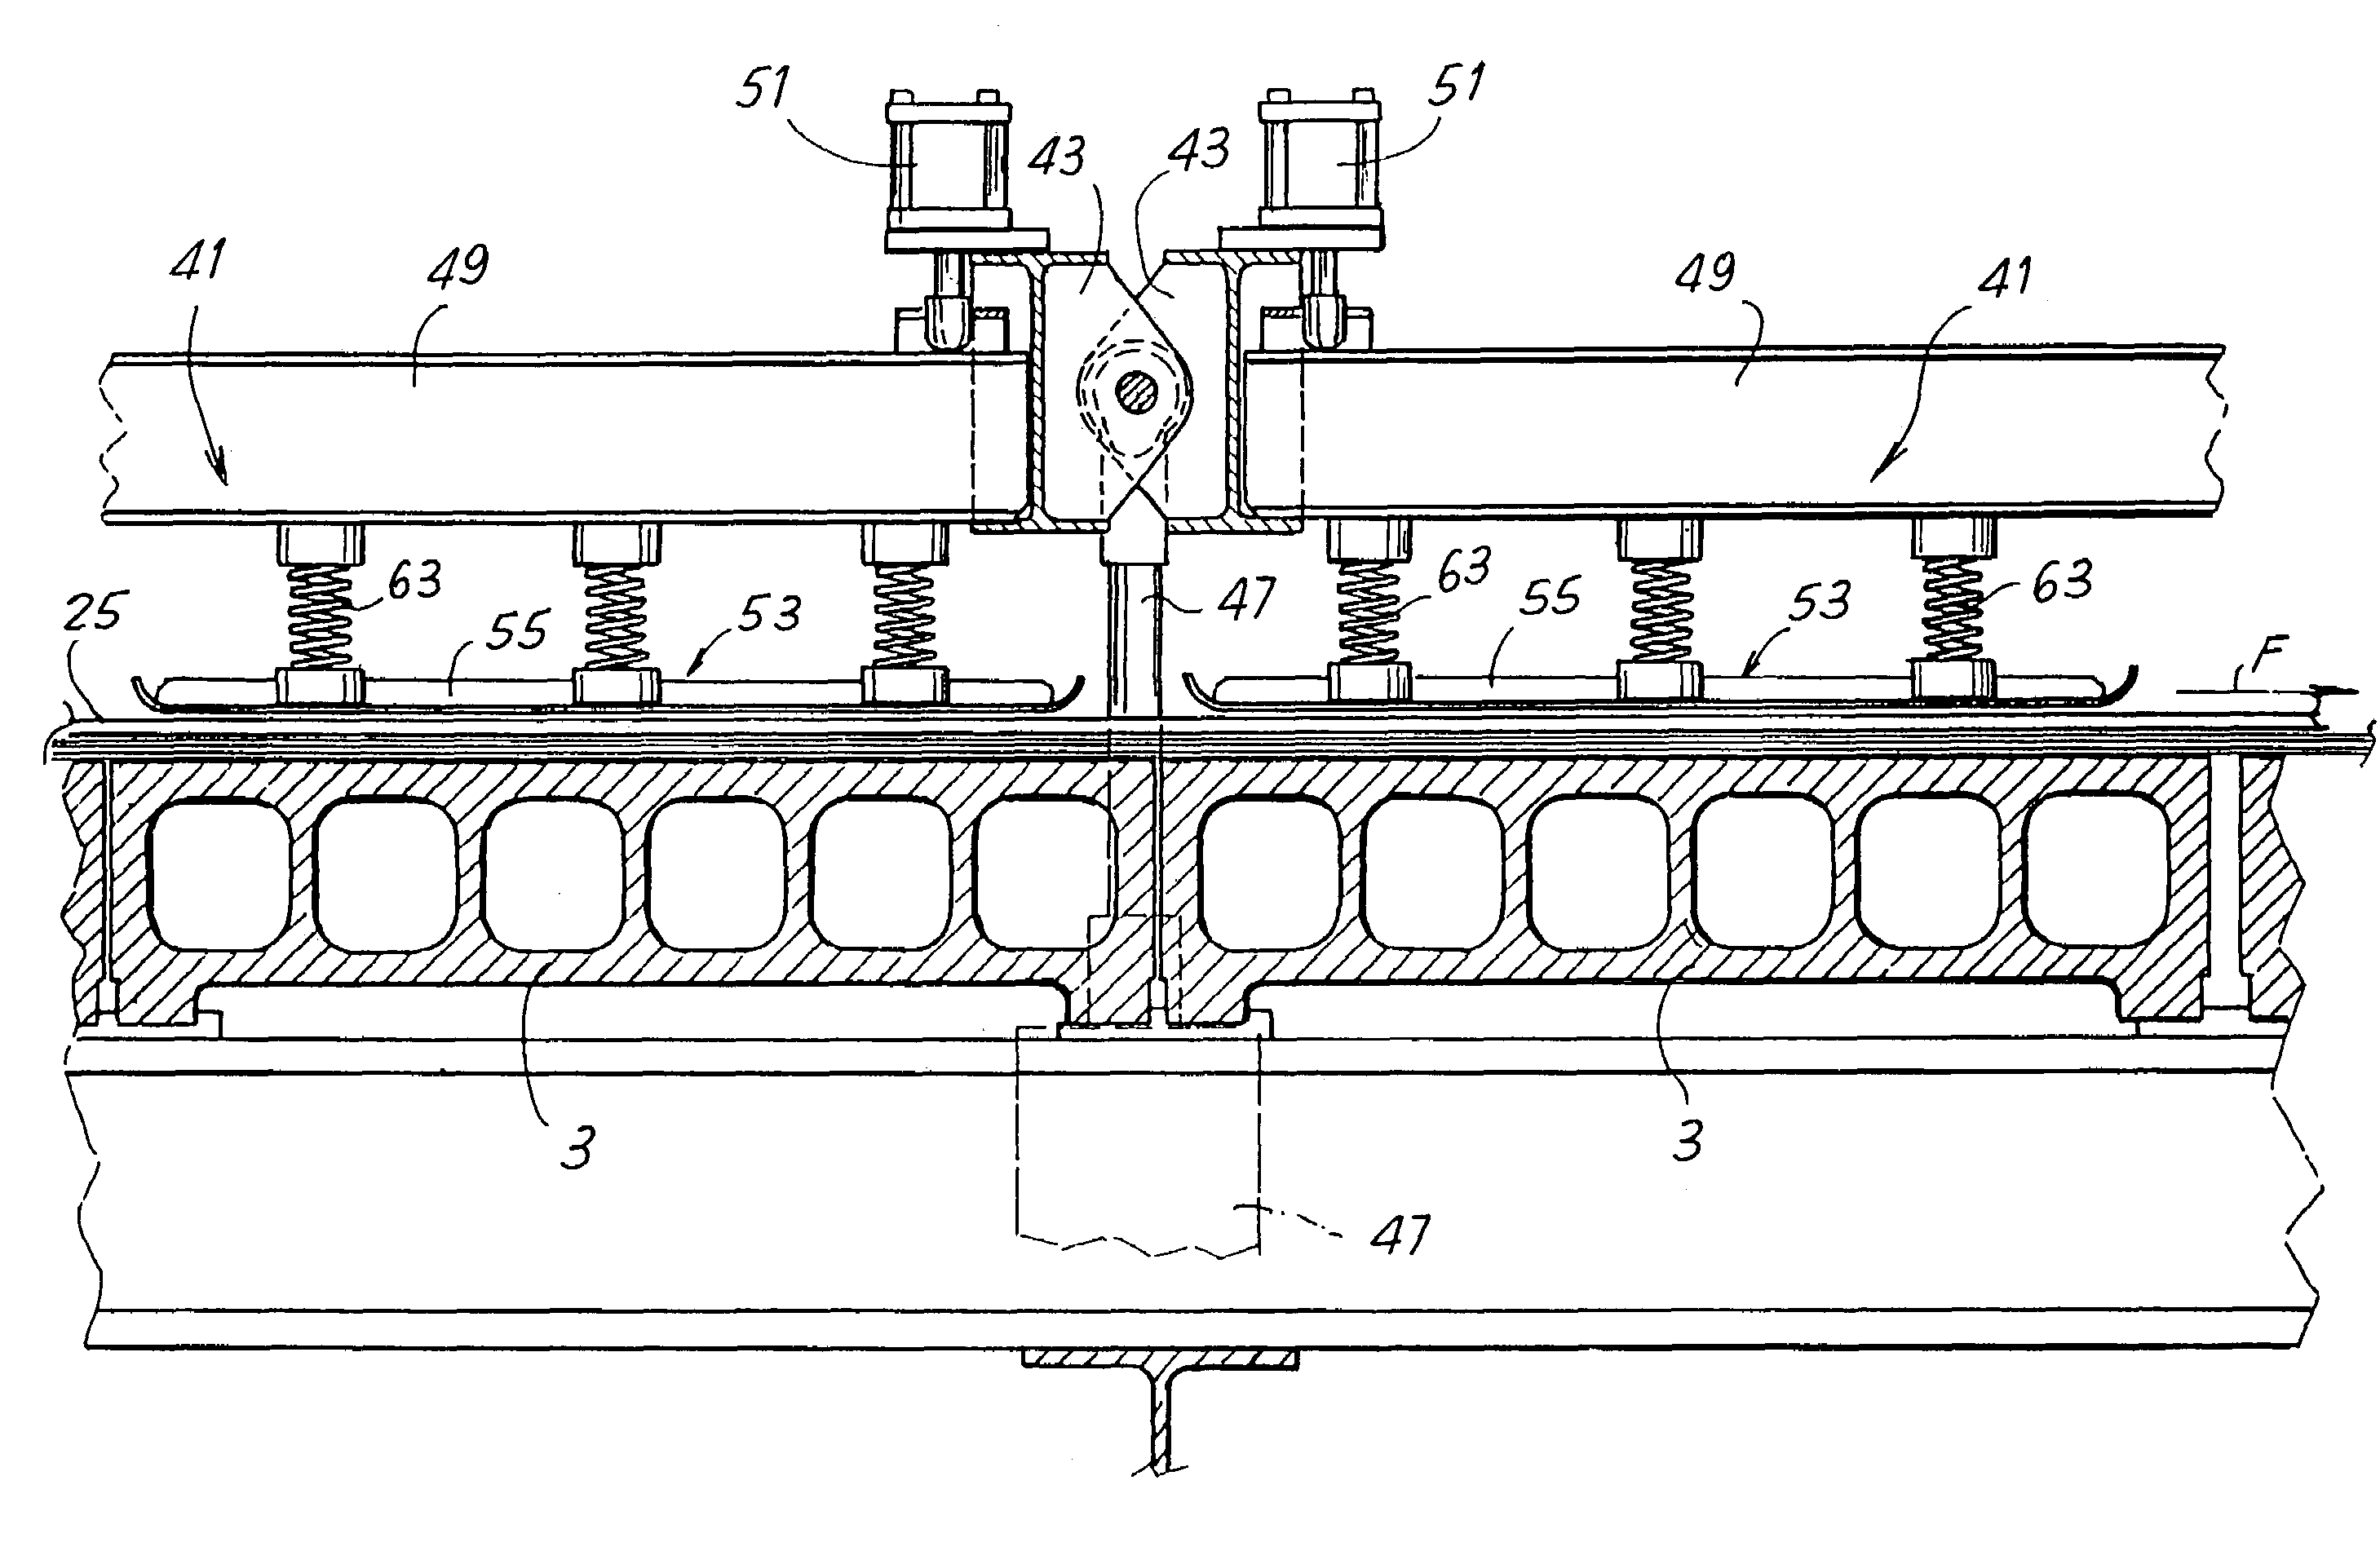 Device for joining sheets of cardboard to form corrugated cardboard